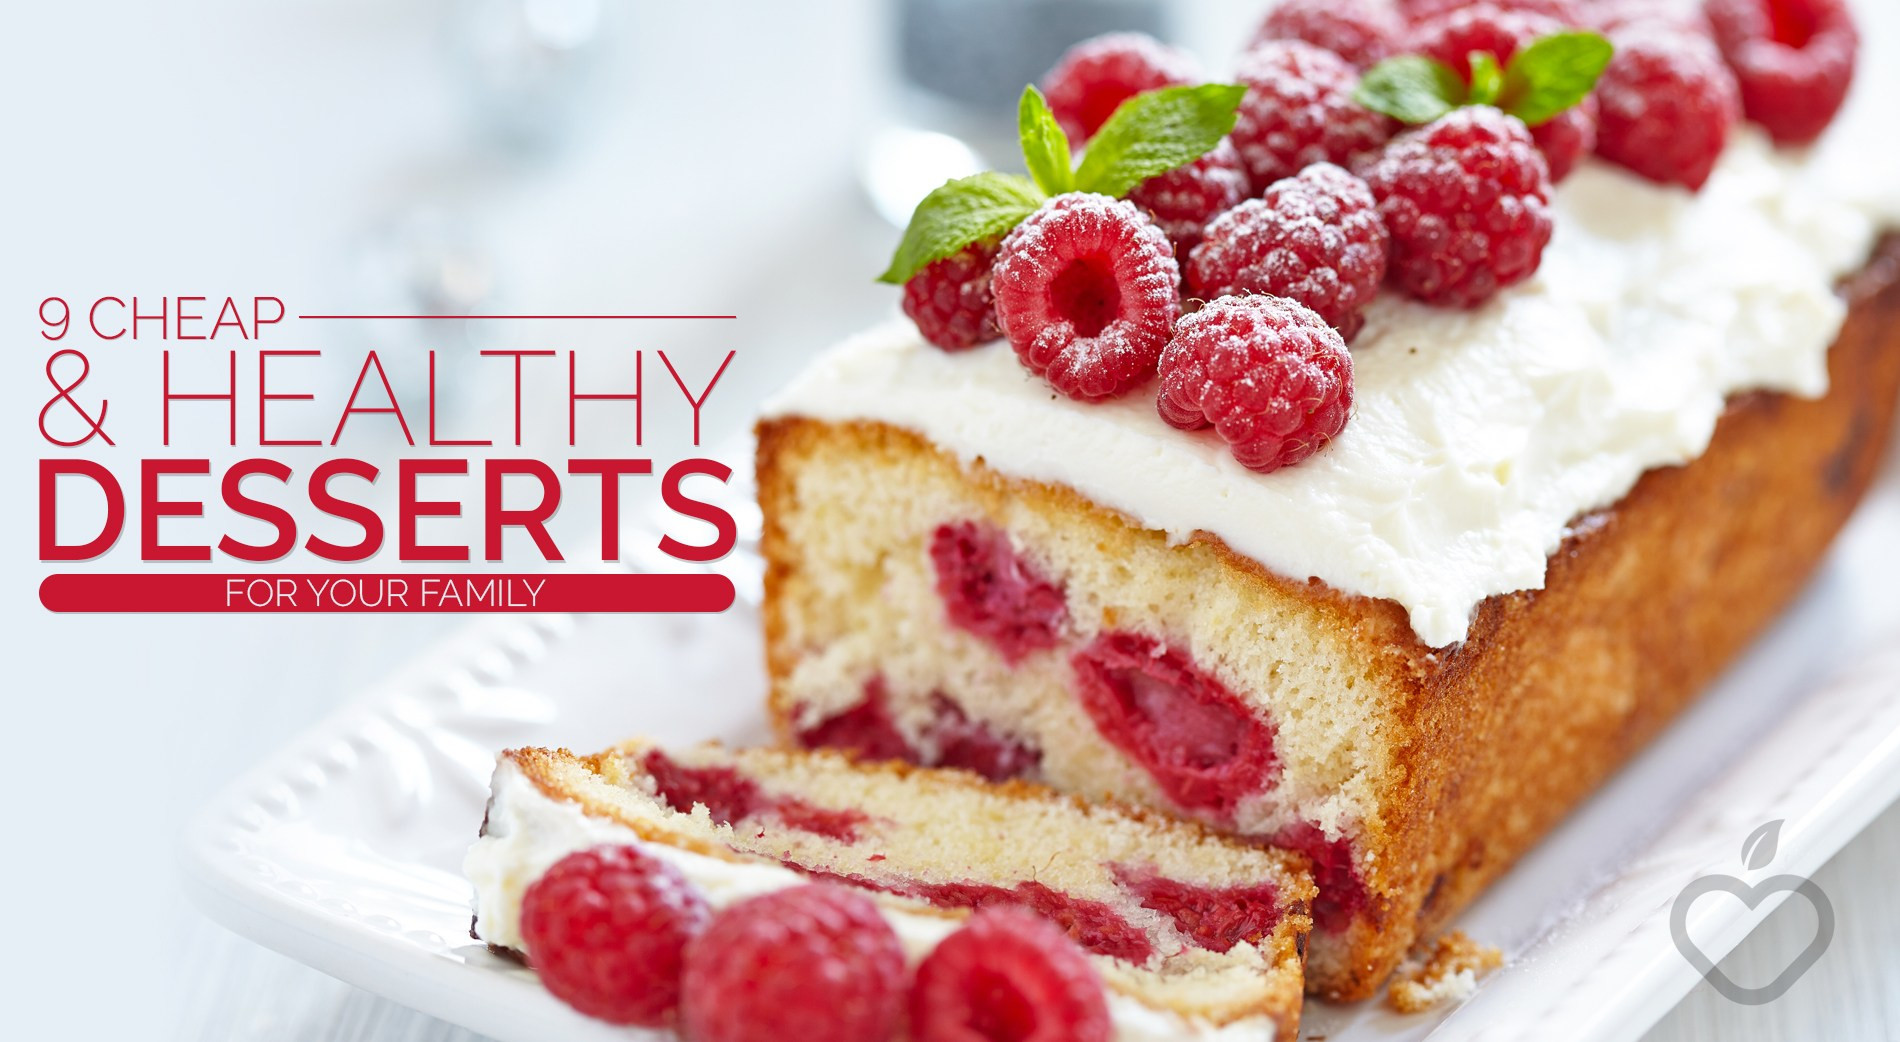 Healthy Diet Desserts
 9 Cheap And Healthy Desserts For Your Family